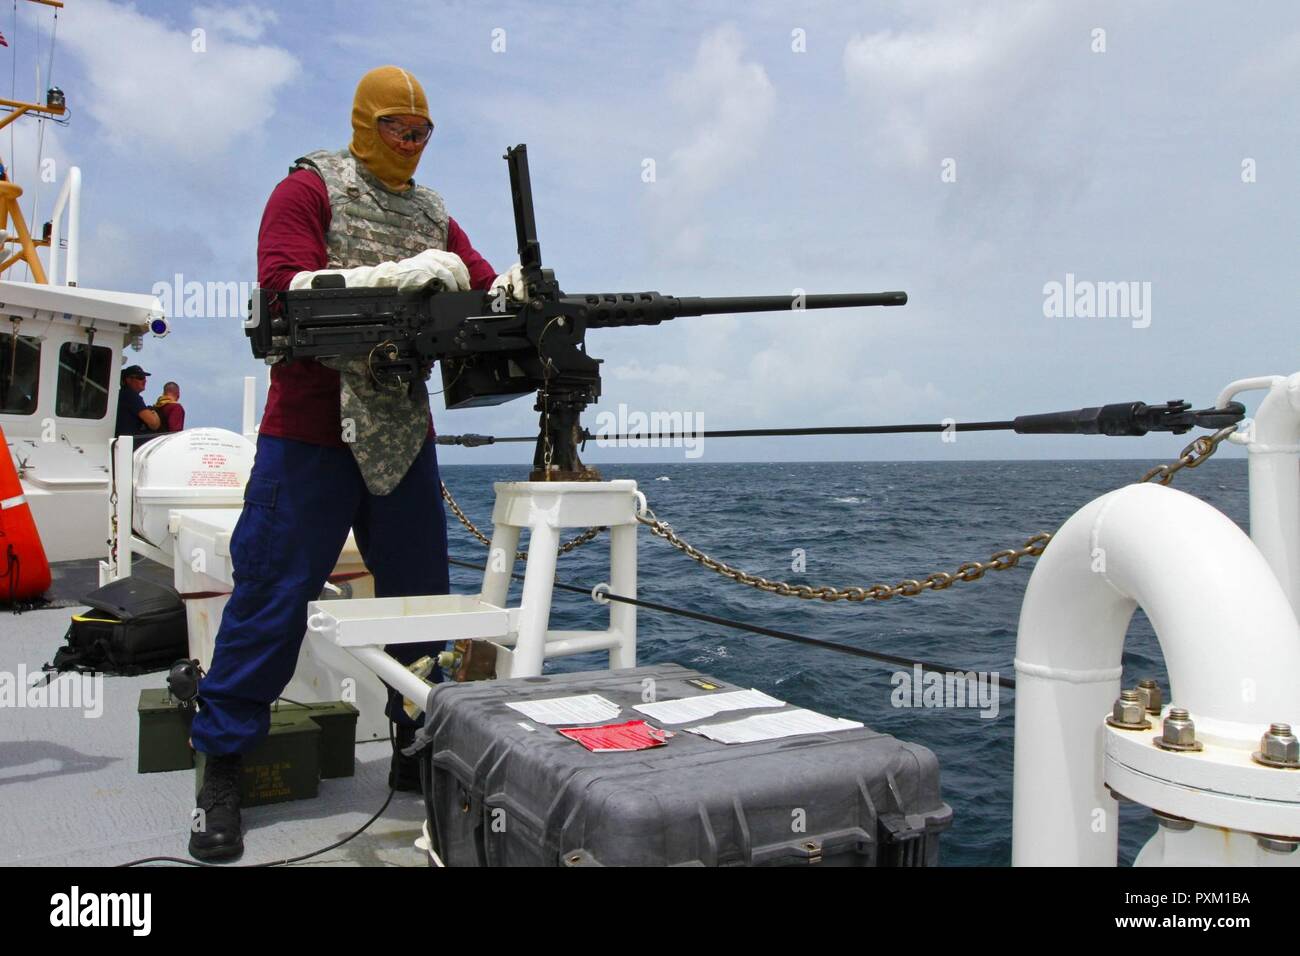 U.S. Coast Guard Electrician’s Technician 2nd Class John Leo, a Newport News, Virginia native serving on the USCG Cutter Winslow Griesser, helps prepare a .50 caliber machine gun during Exercise Tradewinds 2017, at the Barbados Coast Guard Station, June 8, 2017. Military and civilians from 20 countries are participating in this year’s exercise in Barbados and Trinidad & Tobago, which runs from June 6-17, 2017. Stock Photo